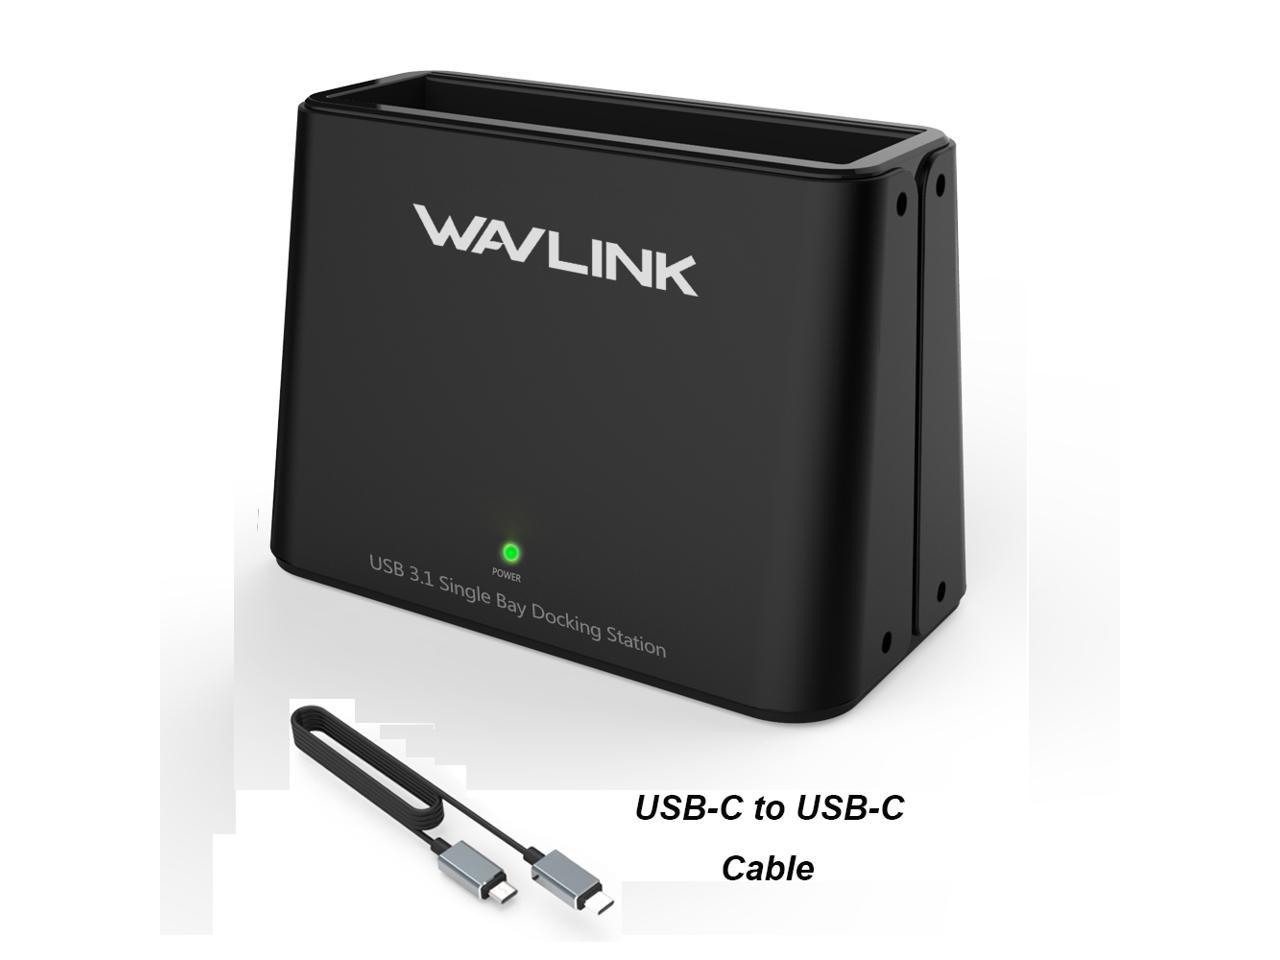 Wavlink Usb C To Sata 2 5 3 5 Hdd Ssd Hard Drive Docking Station 8tb Capacity 5gbps Transfer Rates Usb 3 1 Type C Interface Usb C Cable Plug And Play External Hard